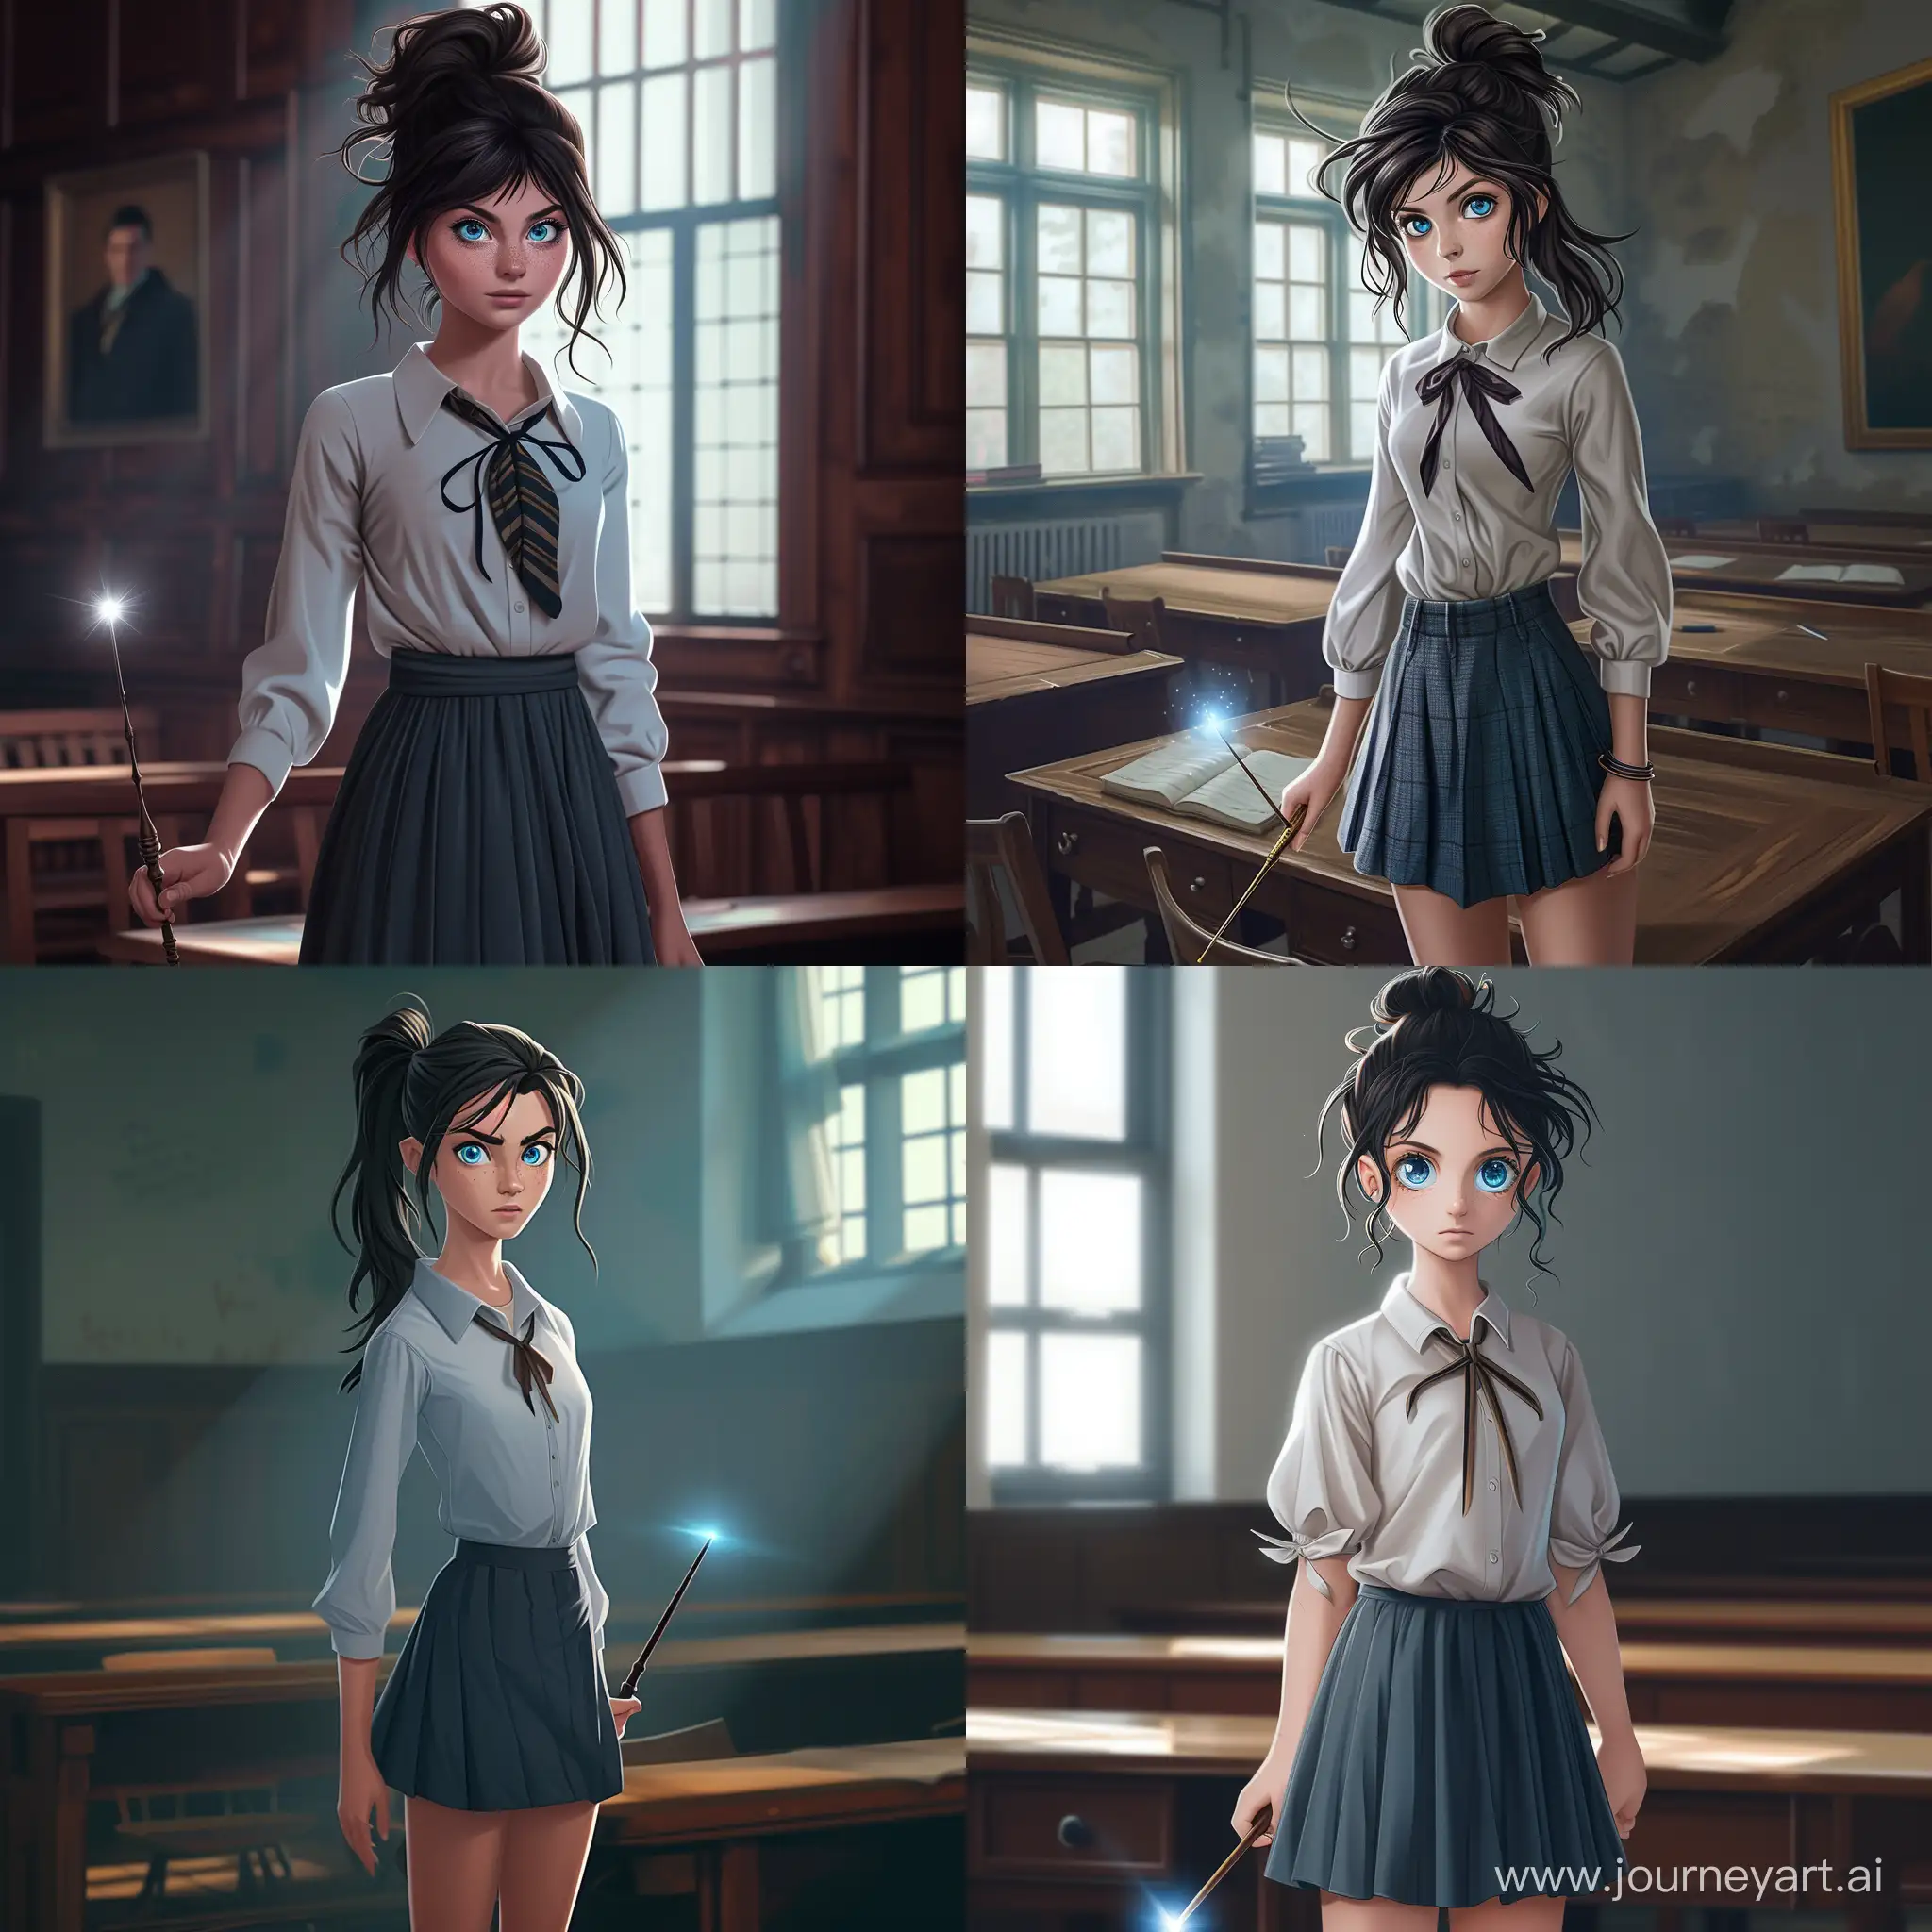 Beautiful girl, disheveled dark hair in a ponytail, blue eyes, white skin, teenager, 15 years old, Hogwarts, Ravenclaw, skirt and blouse, standing in class, magic wand, spell, full height, high quality, high detail, cartoon art